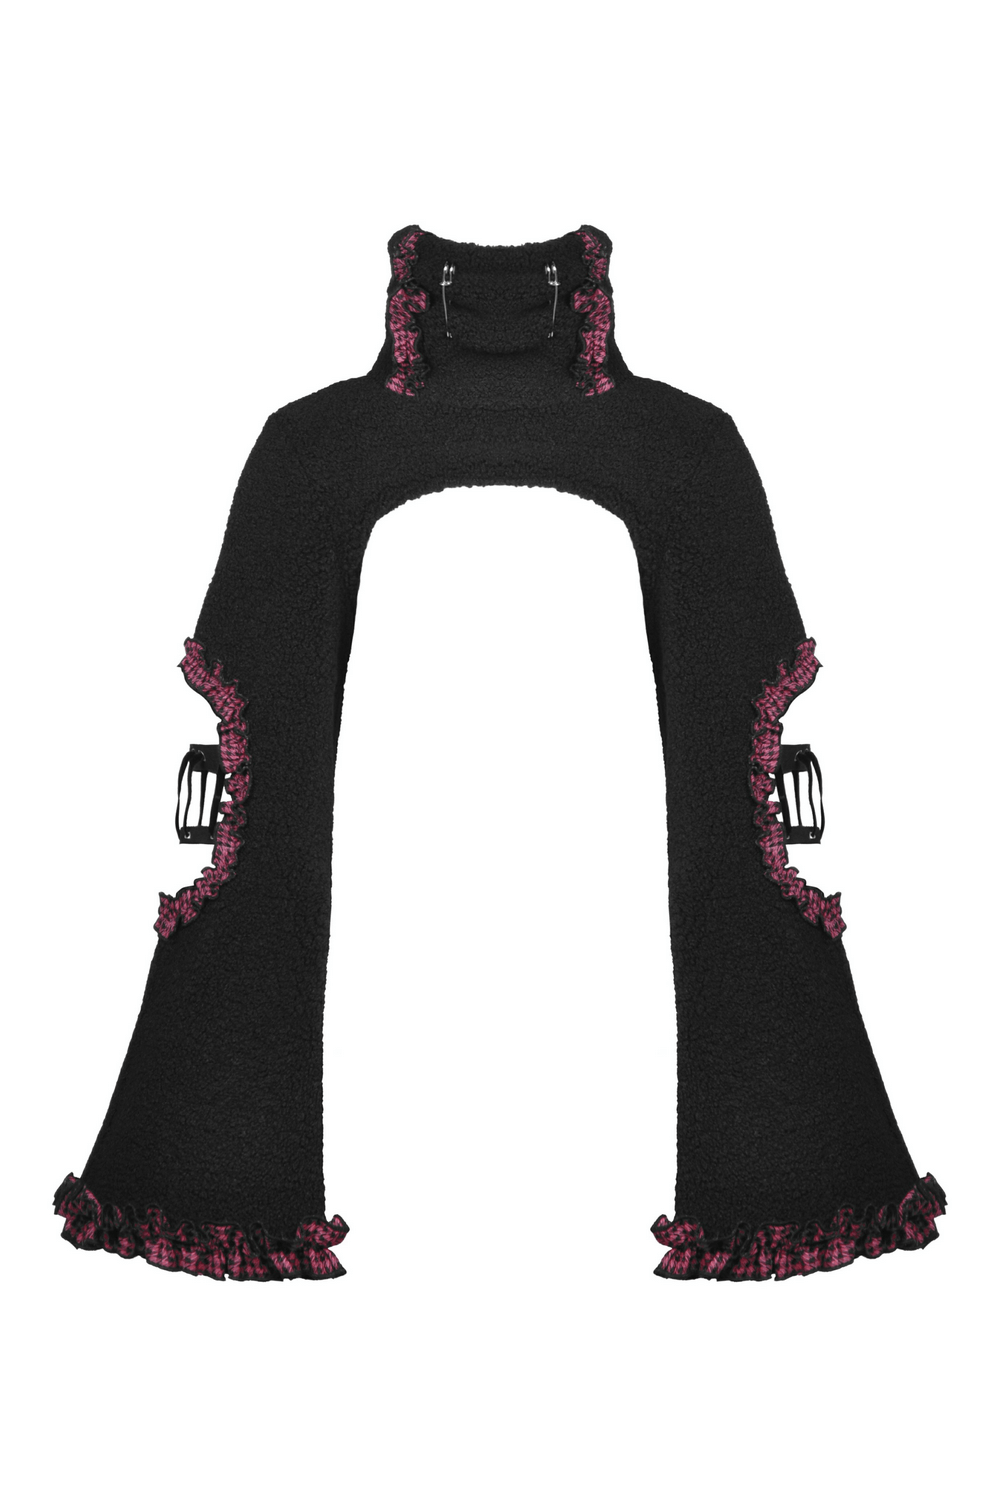 Victorian Gothic Cape with Pink Contrast Lace